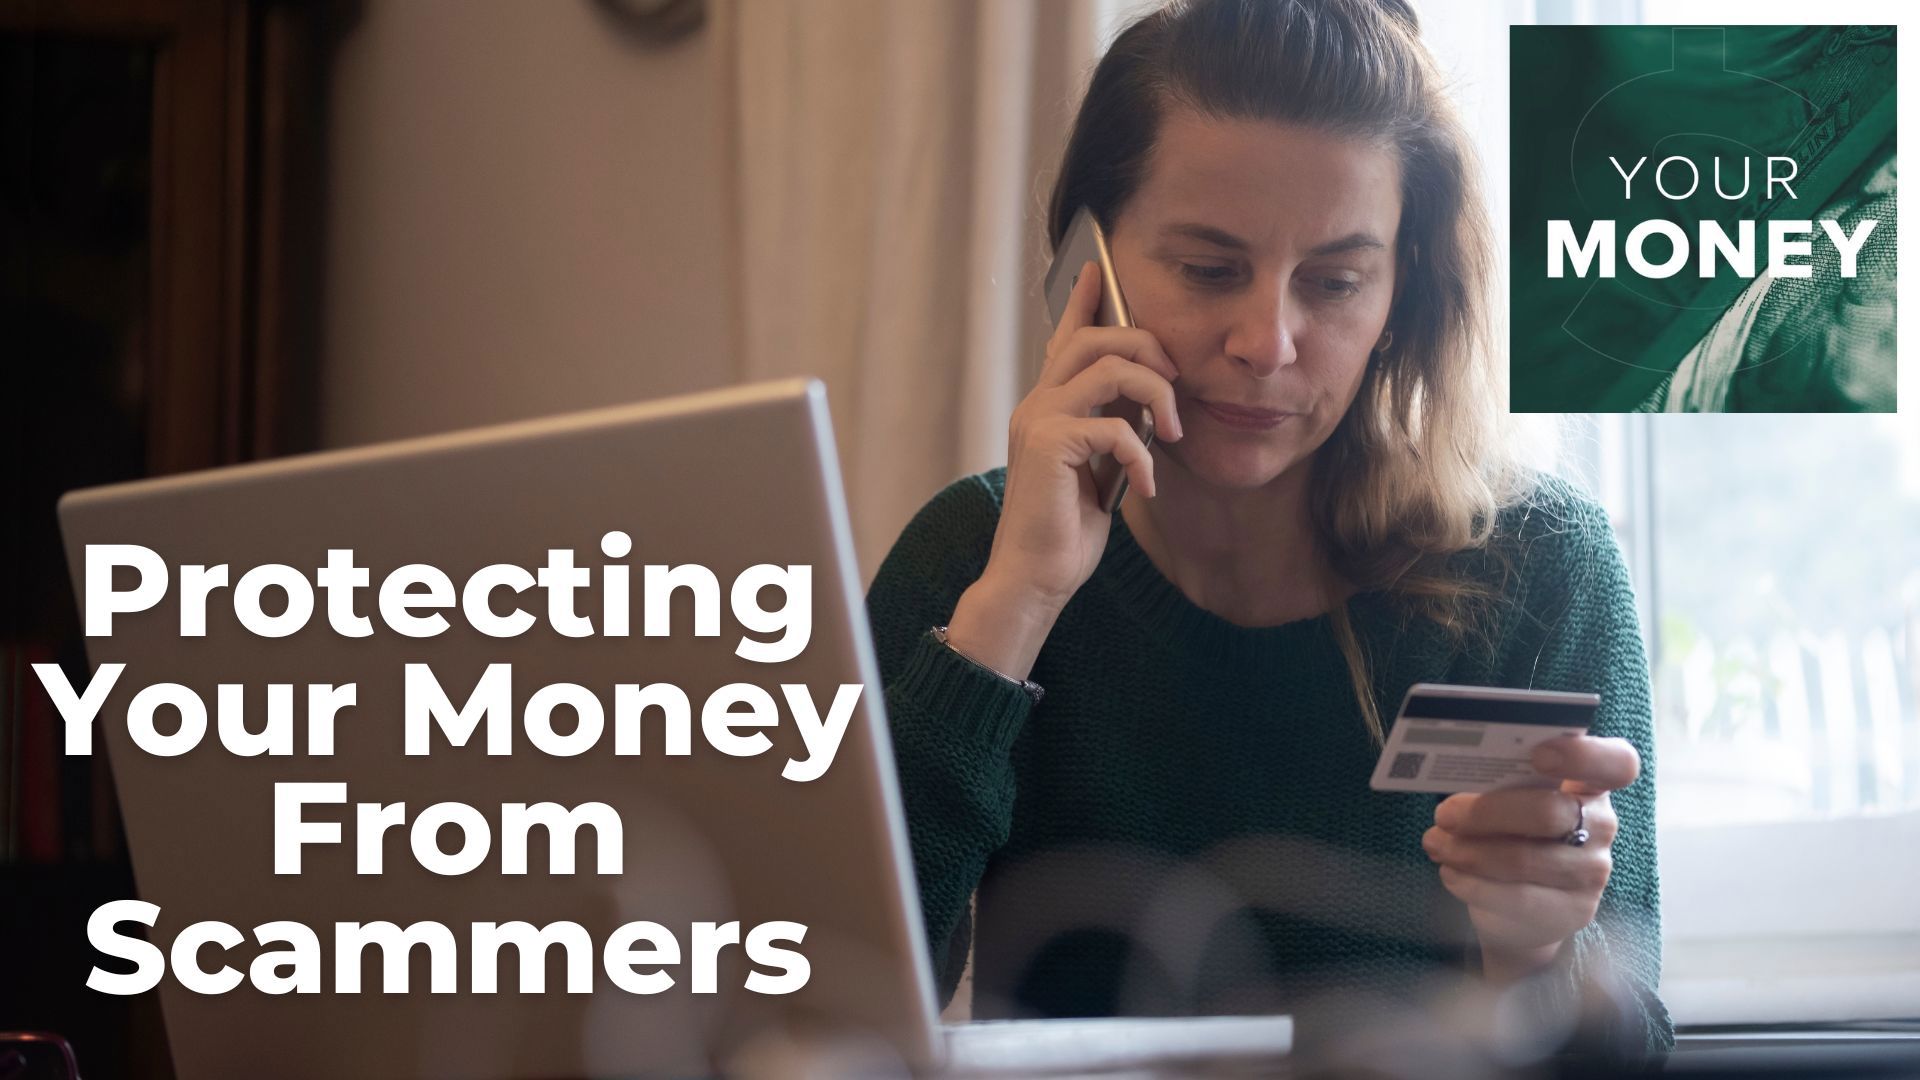 Gordon Severson shares tips on how to protect your money from scammers, as well as who are the most likely to be targets. Plus, the latest scams to be aware of.